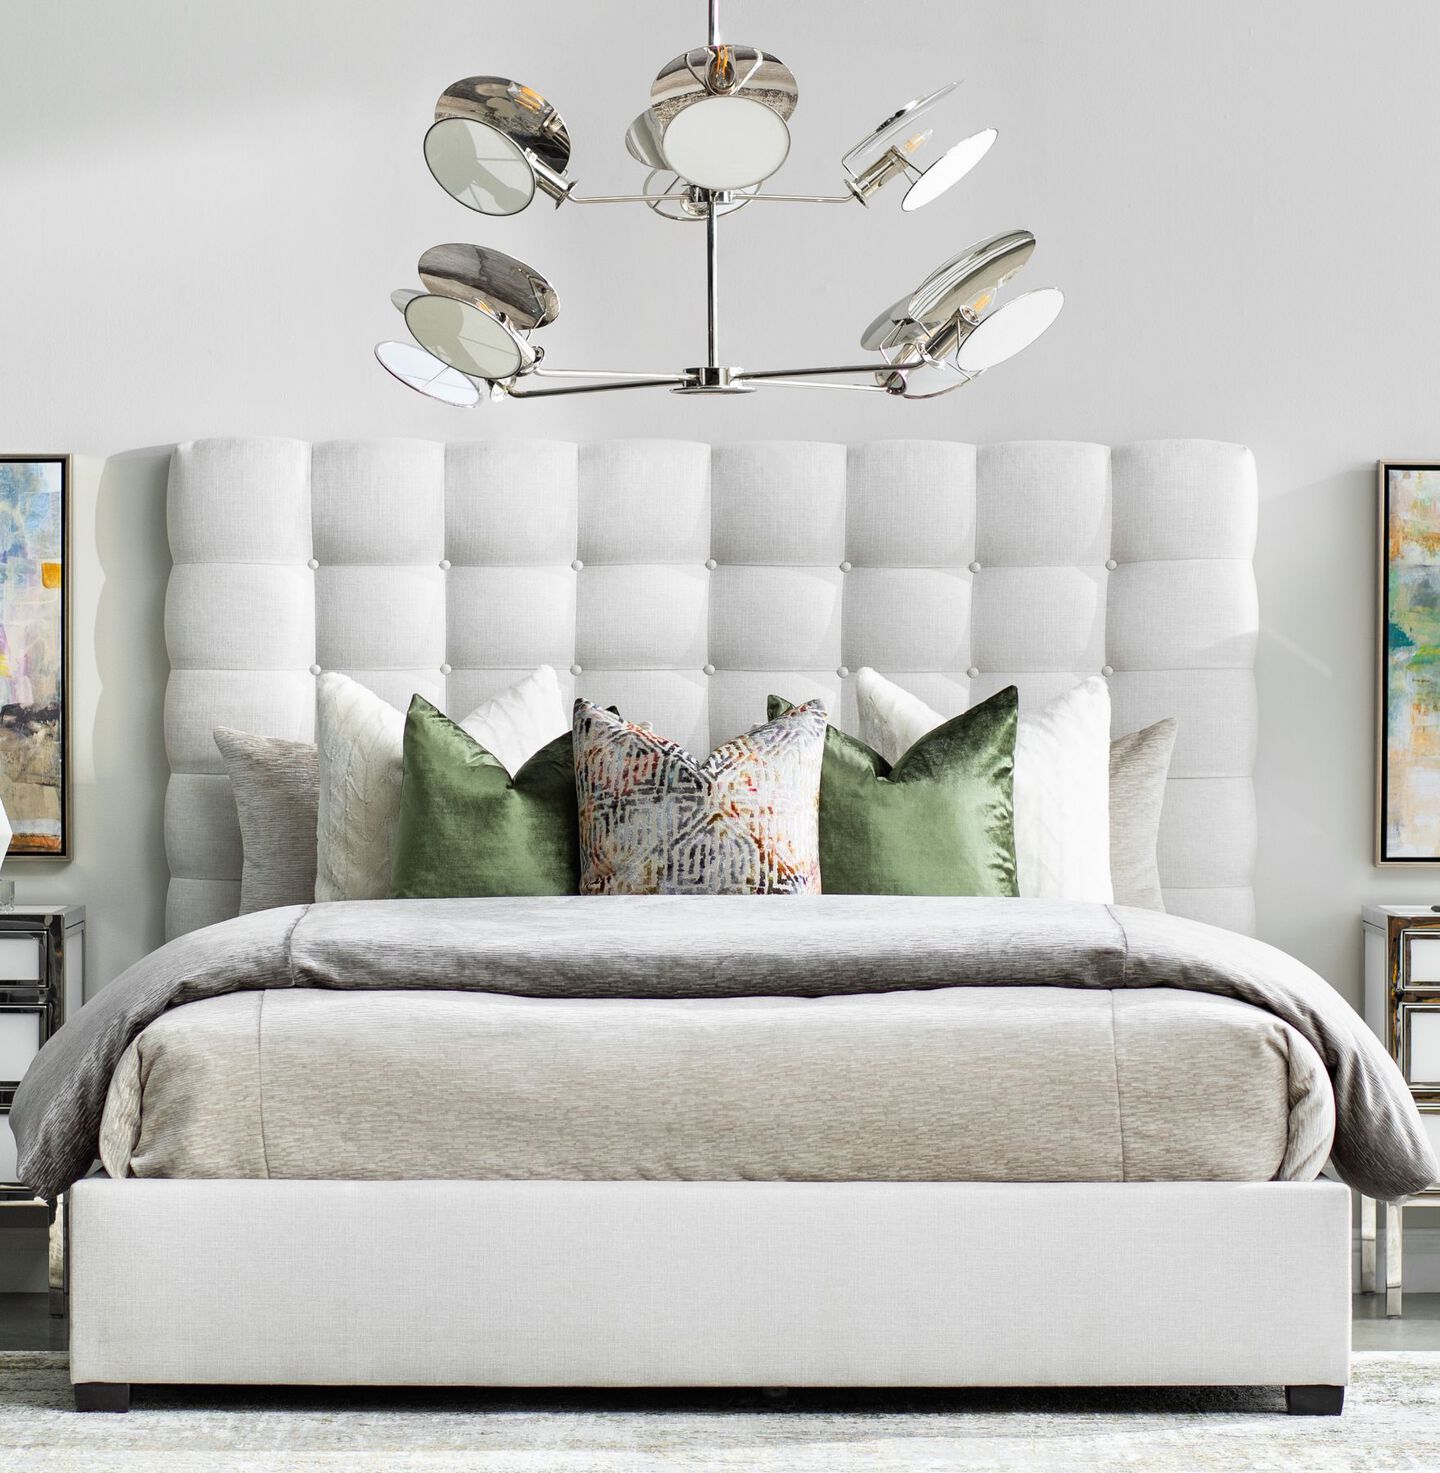 Unique light fixture hanging above a light grey bed with green assorted pillows